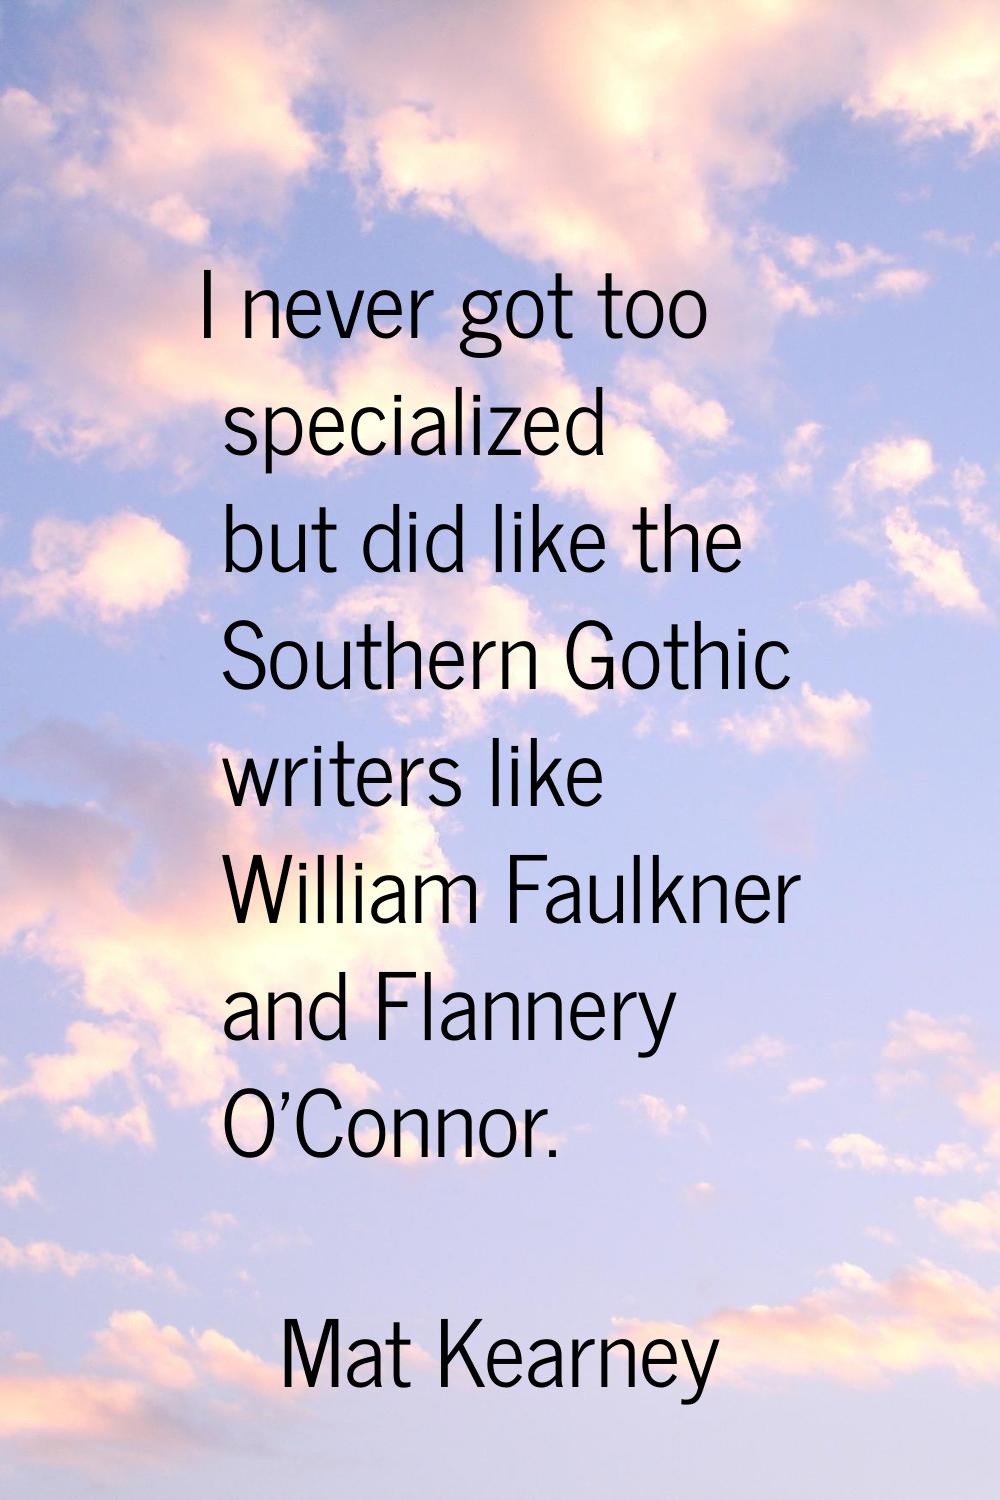 I never got too specialized but did like the Southern Gothic writers like William Faulkner and Flan